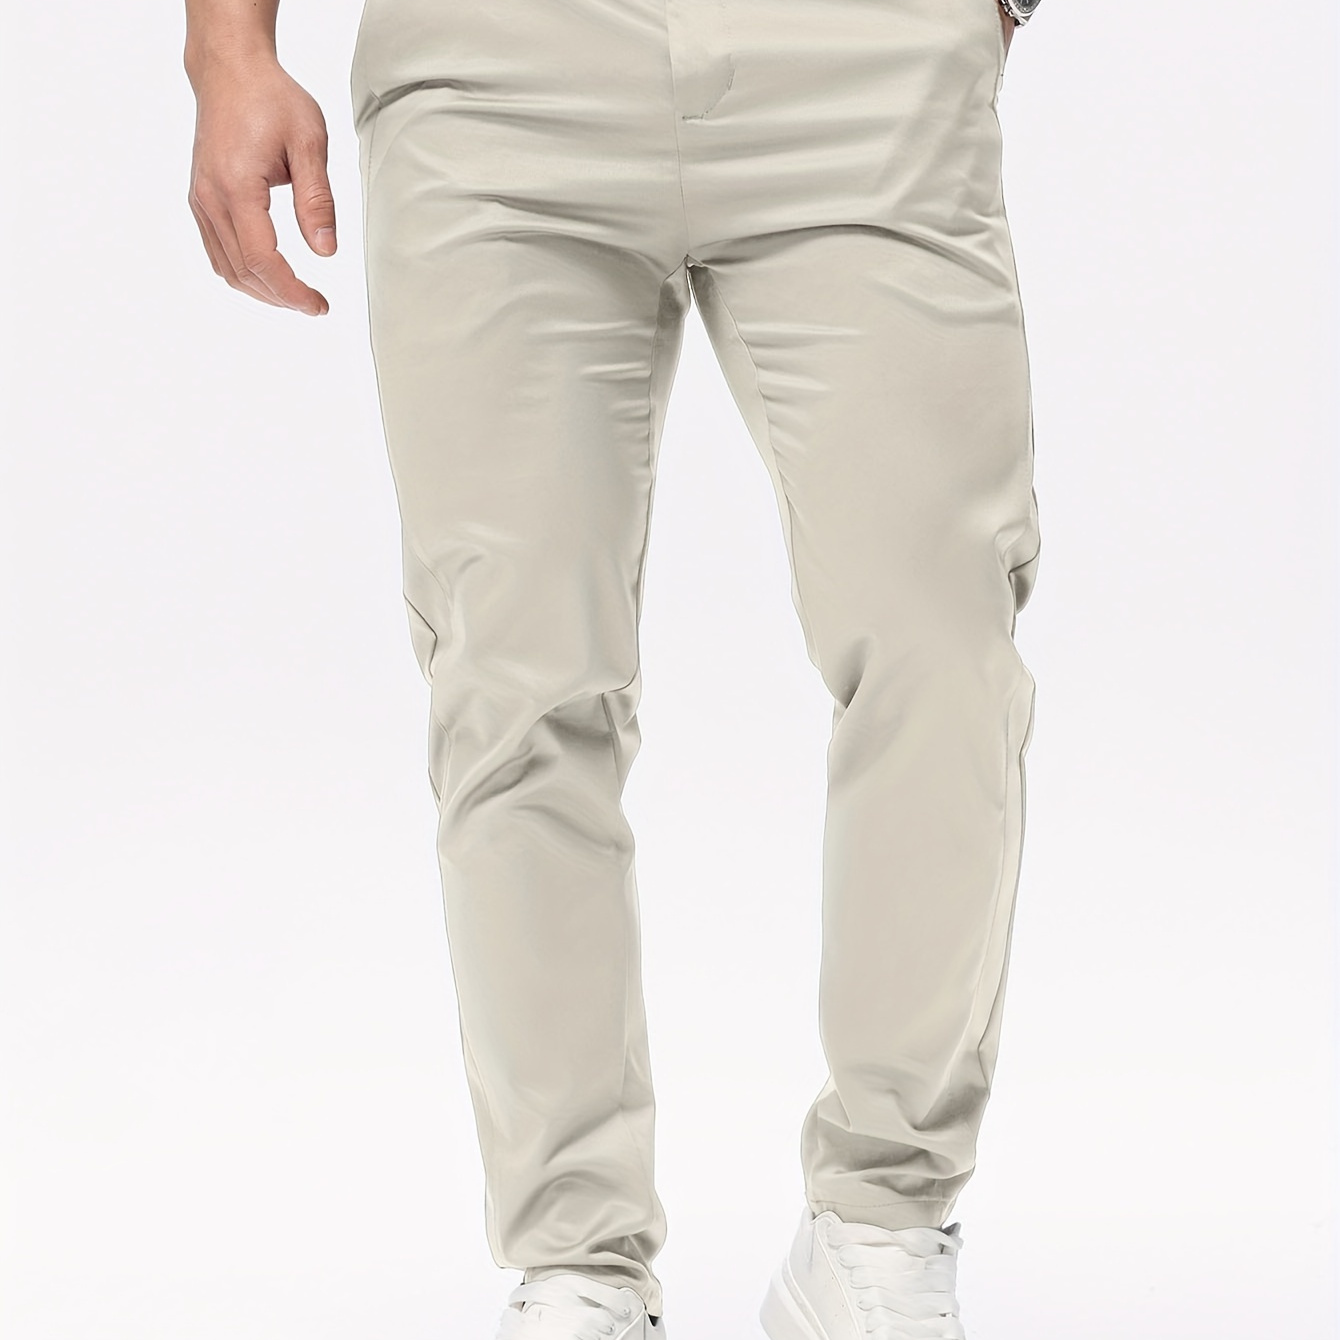 

Men's Slim Fit Casual Pants With Side Pockets, Fashion Trendy Solid Trousers, High-end Tapered Leg Men's Stylish Pants